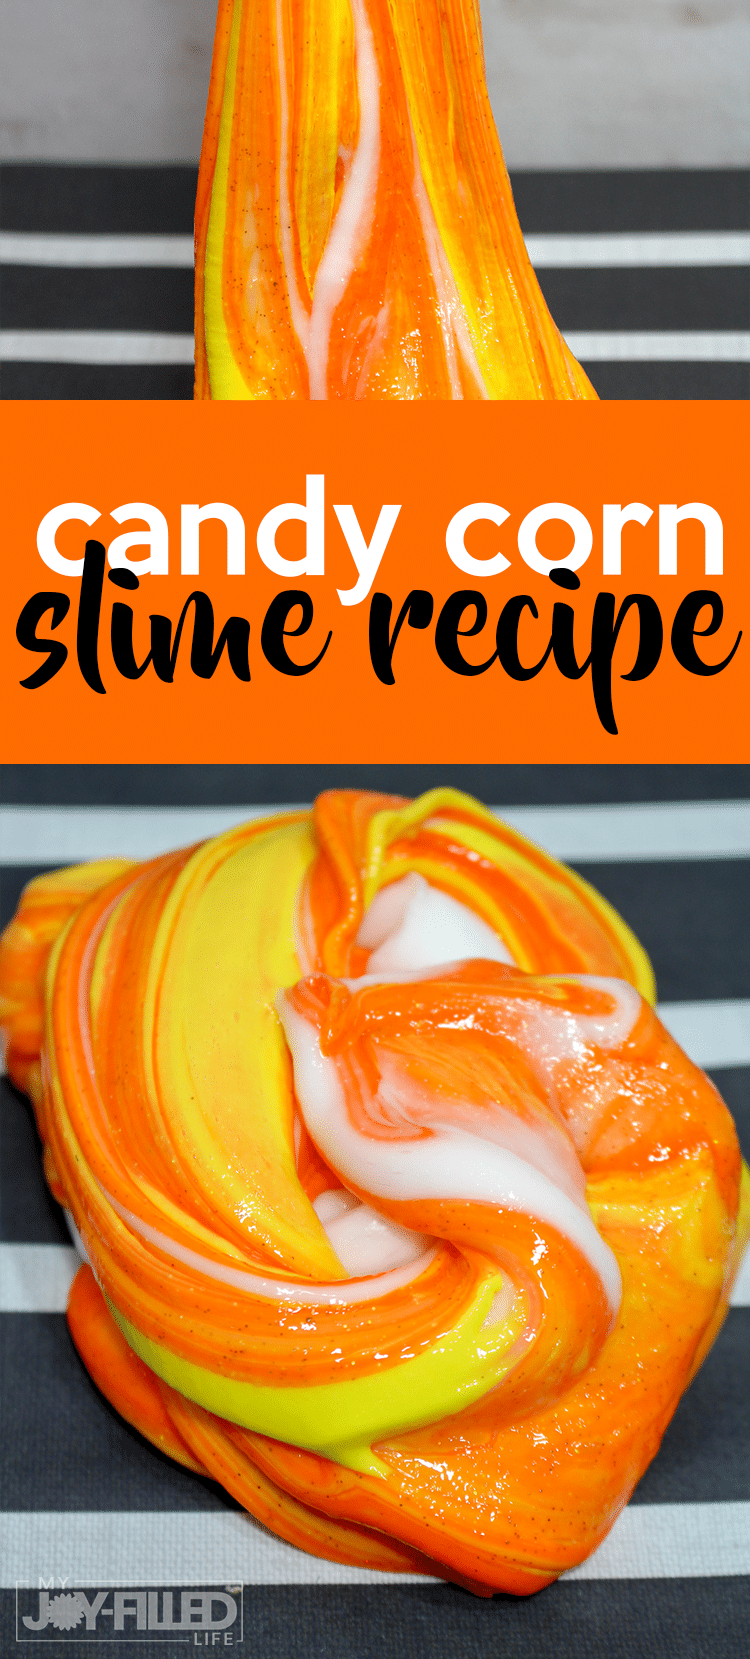 This candy corn slime is the PERFECT slime recipe for fall! It's such a fun diy slime and the kids are sure to have fun playing with this slime recipe! #slime #candycorn